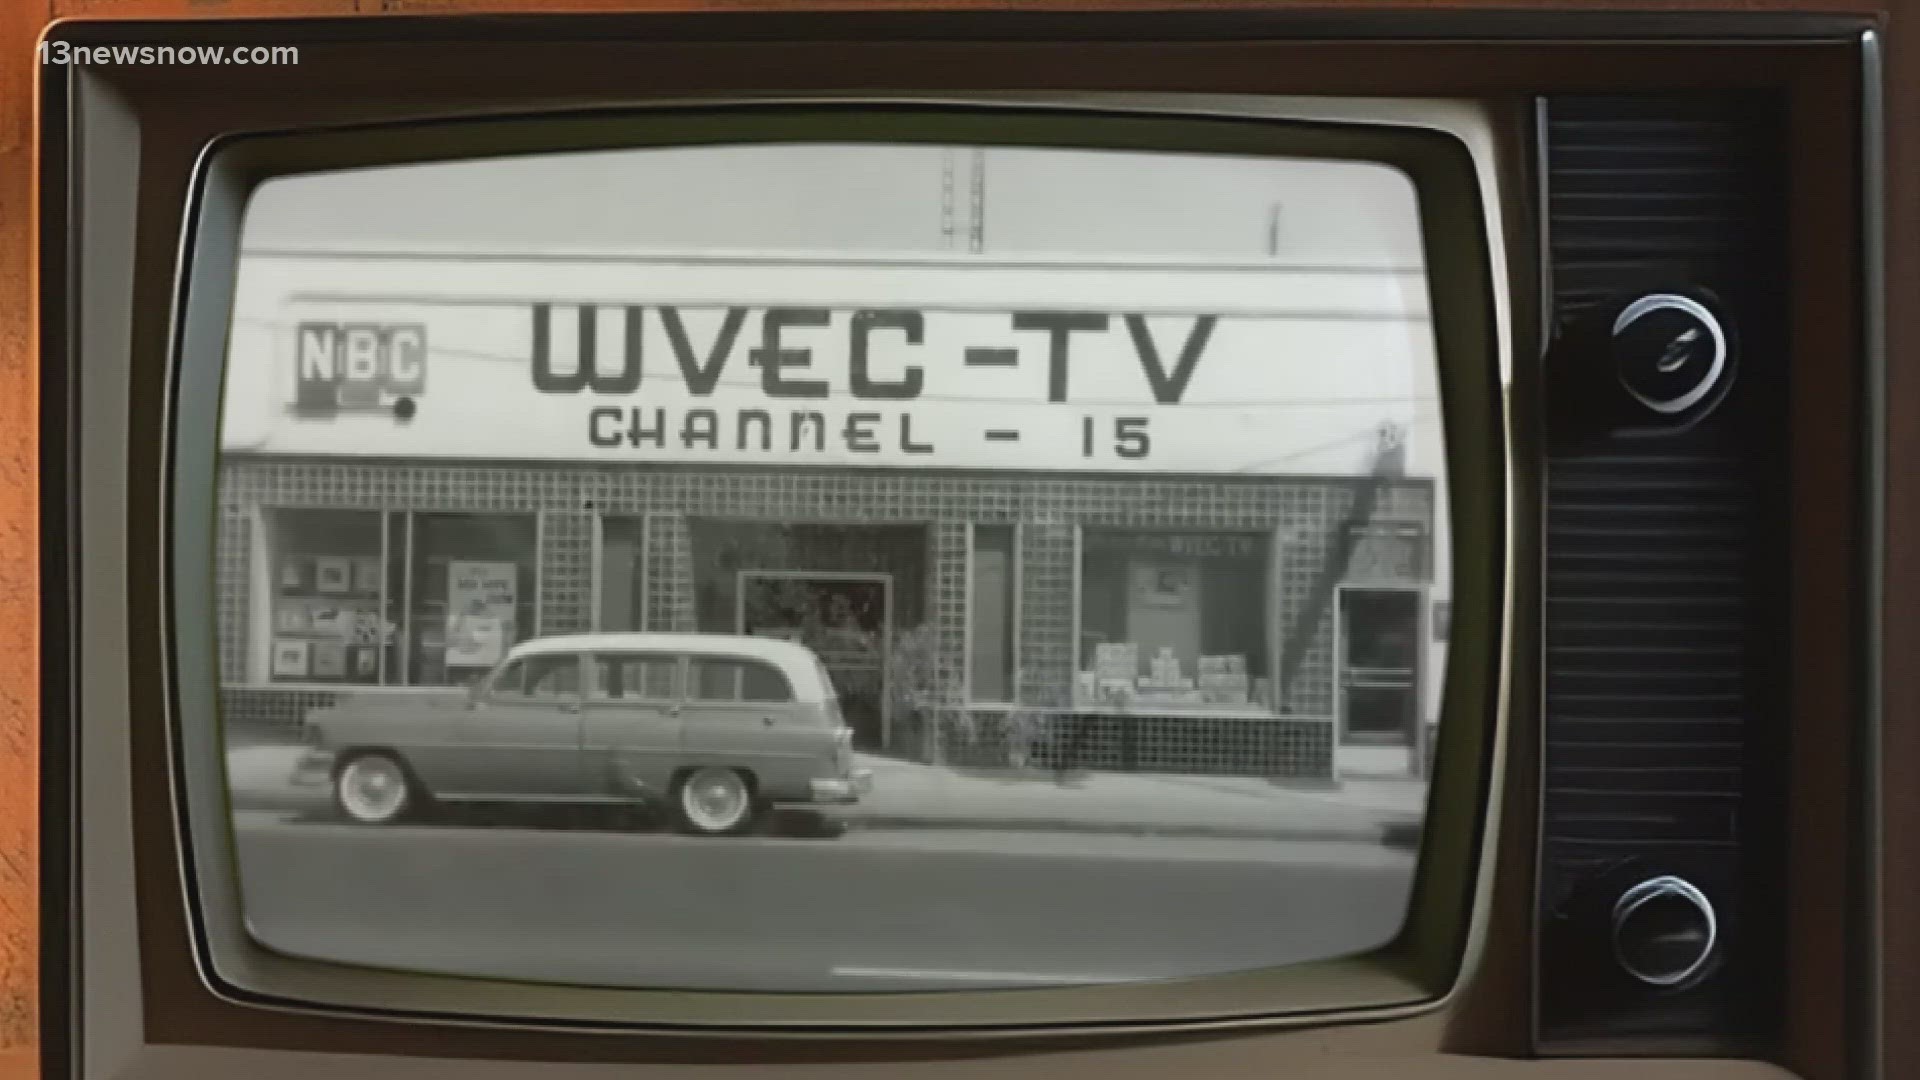 Over the decades, WVEC-TV has served Virginia's Hampton Roads region and northeastern North Carolina with passion for people, in our product and in the community.